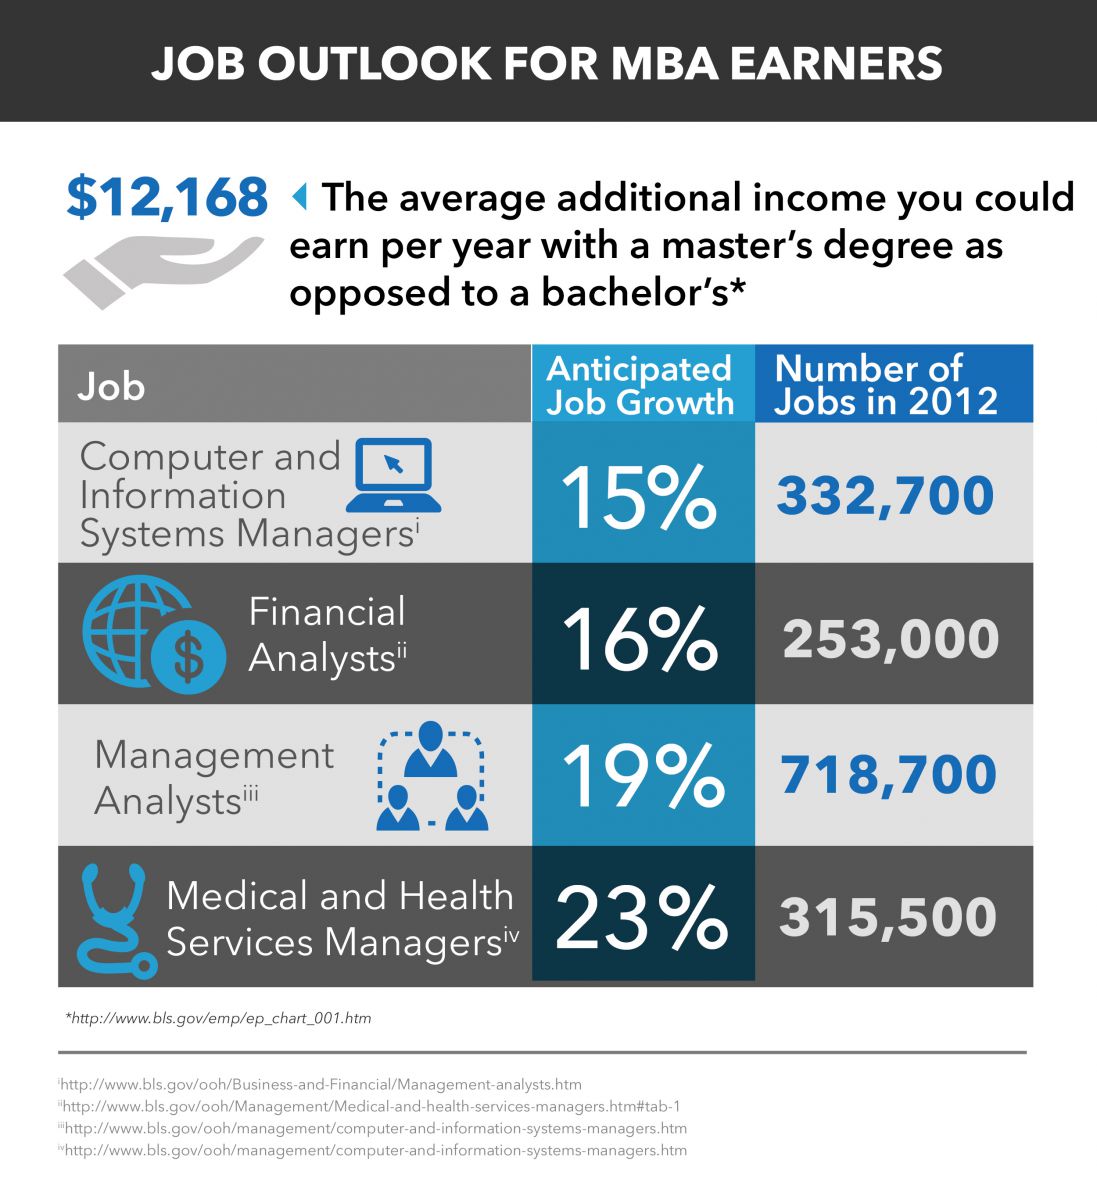 mba salary and job outlook